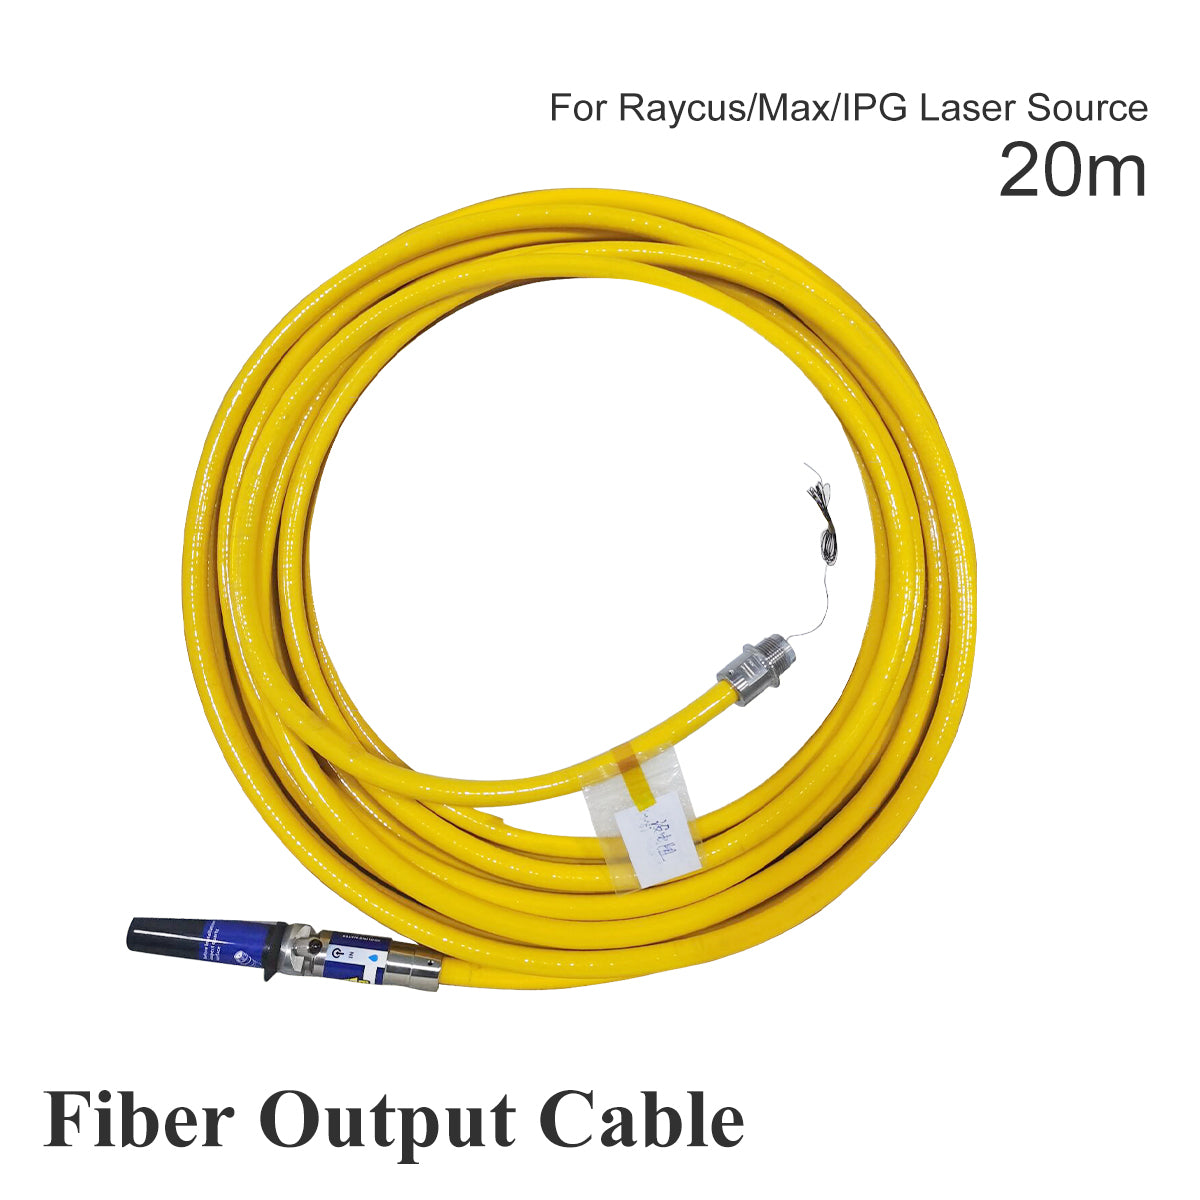 Startnow Optical Cable 20M 50um Raycus MAX IPG For Fiber Metal Cutting Optical RF Cable